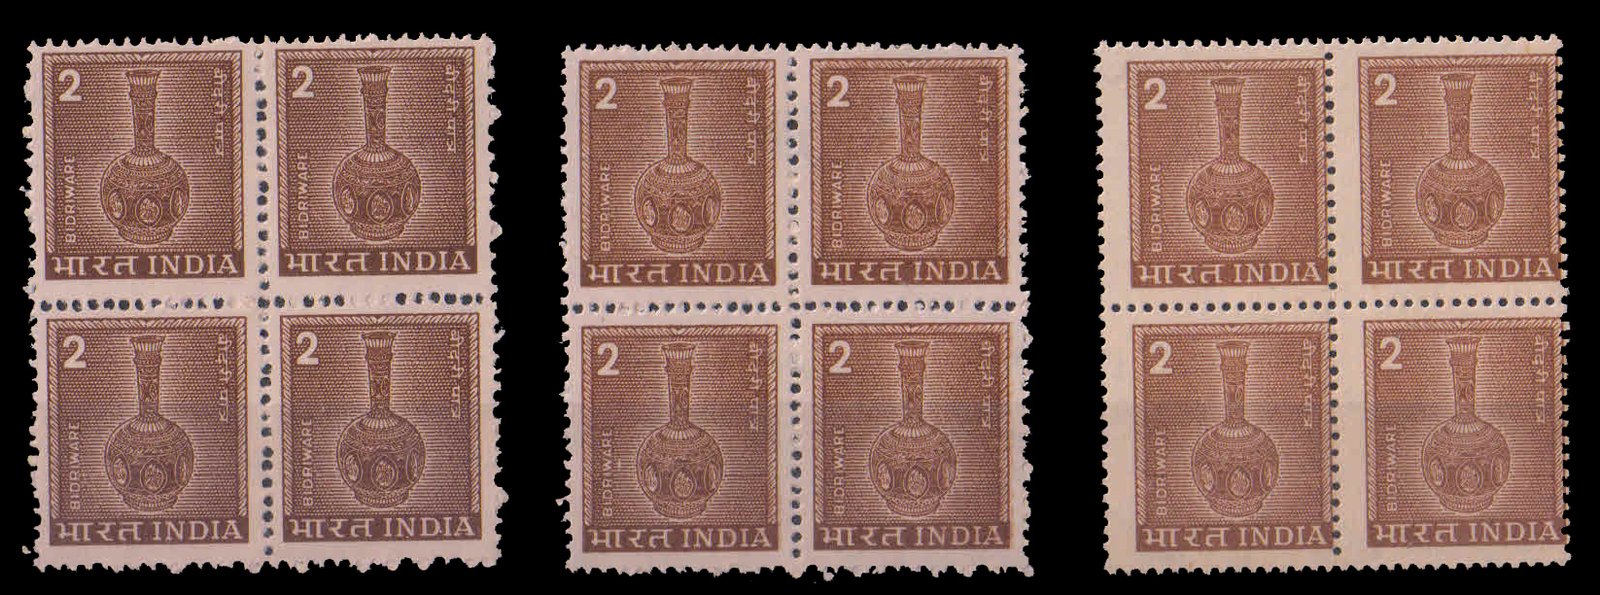 INDIA 1974-2 P. Bidrivase Litho-5th Definitive-3 Different Colour Variety Block-Perforation Variety-MNH, Wmk Large Star & INDIA GOVT-As per scan-S.G. 724a